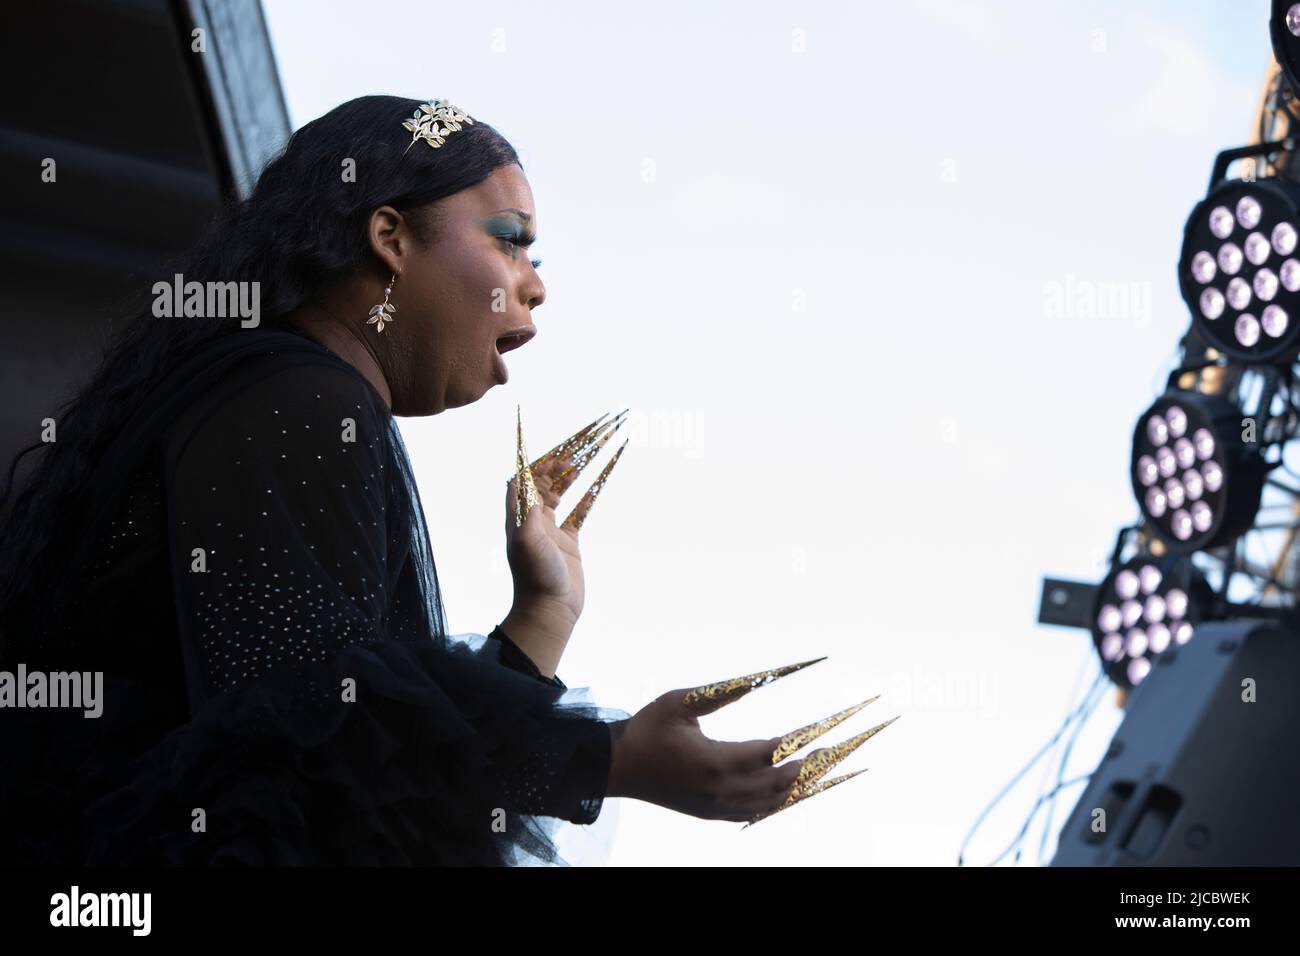 White Center, Washington, USA. 11th June, 2022. A performer entertains the audience with a lyp-synch at the White Center Pride festival. Credit: Paul Christian Gordon/Alamy Live News Stock Photo